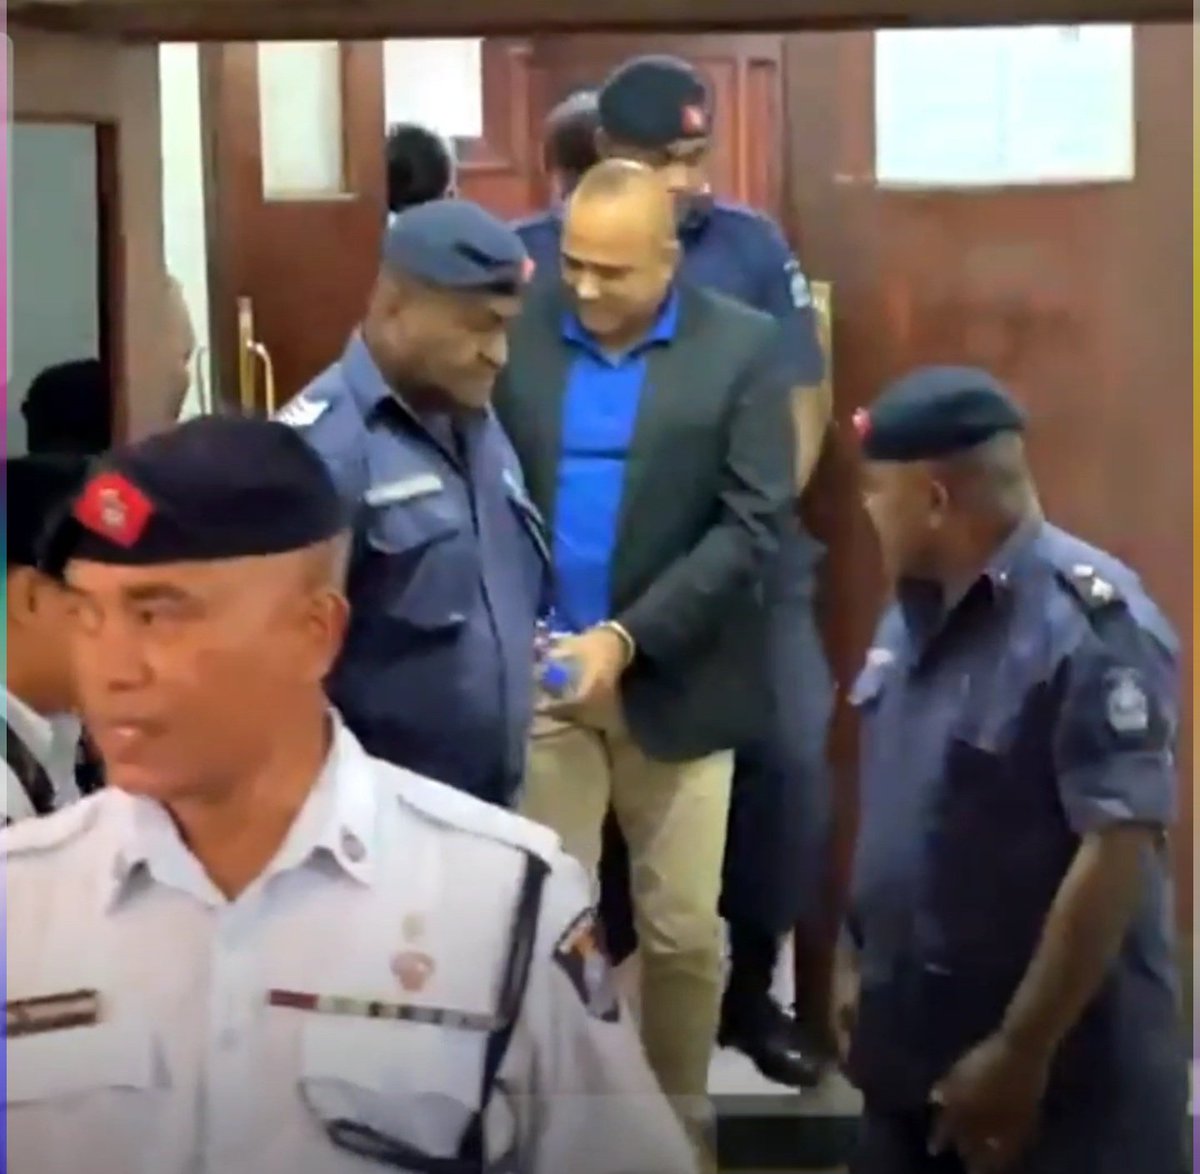 Former PM Frank Bainimarama emerges from court in handcuffs that has been coveted with a white piece of cloth. Former COMPOL Sitiveni Qilihio emerges from court in handcuffs.